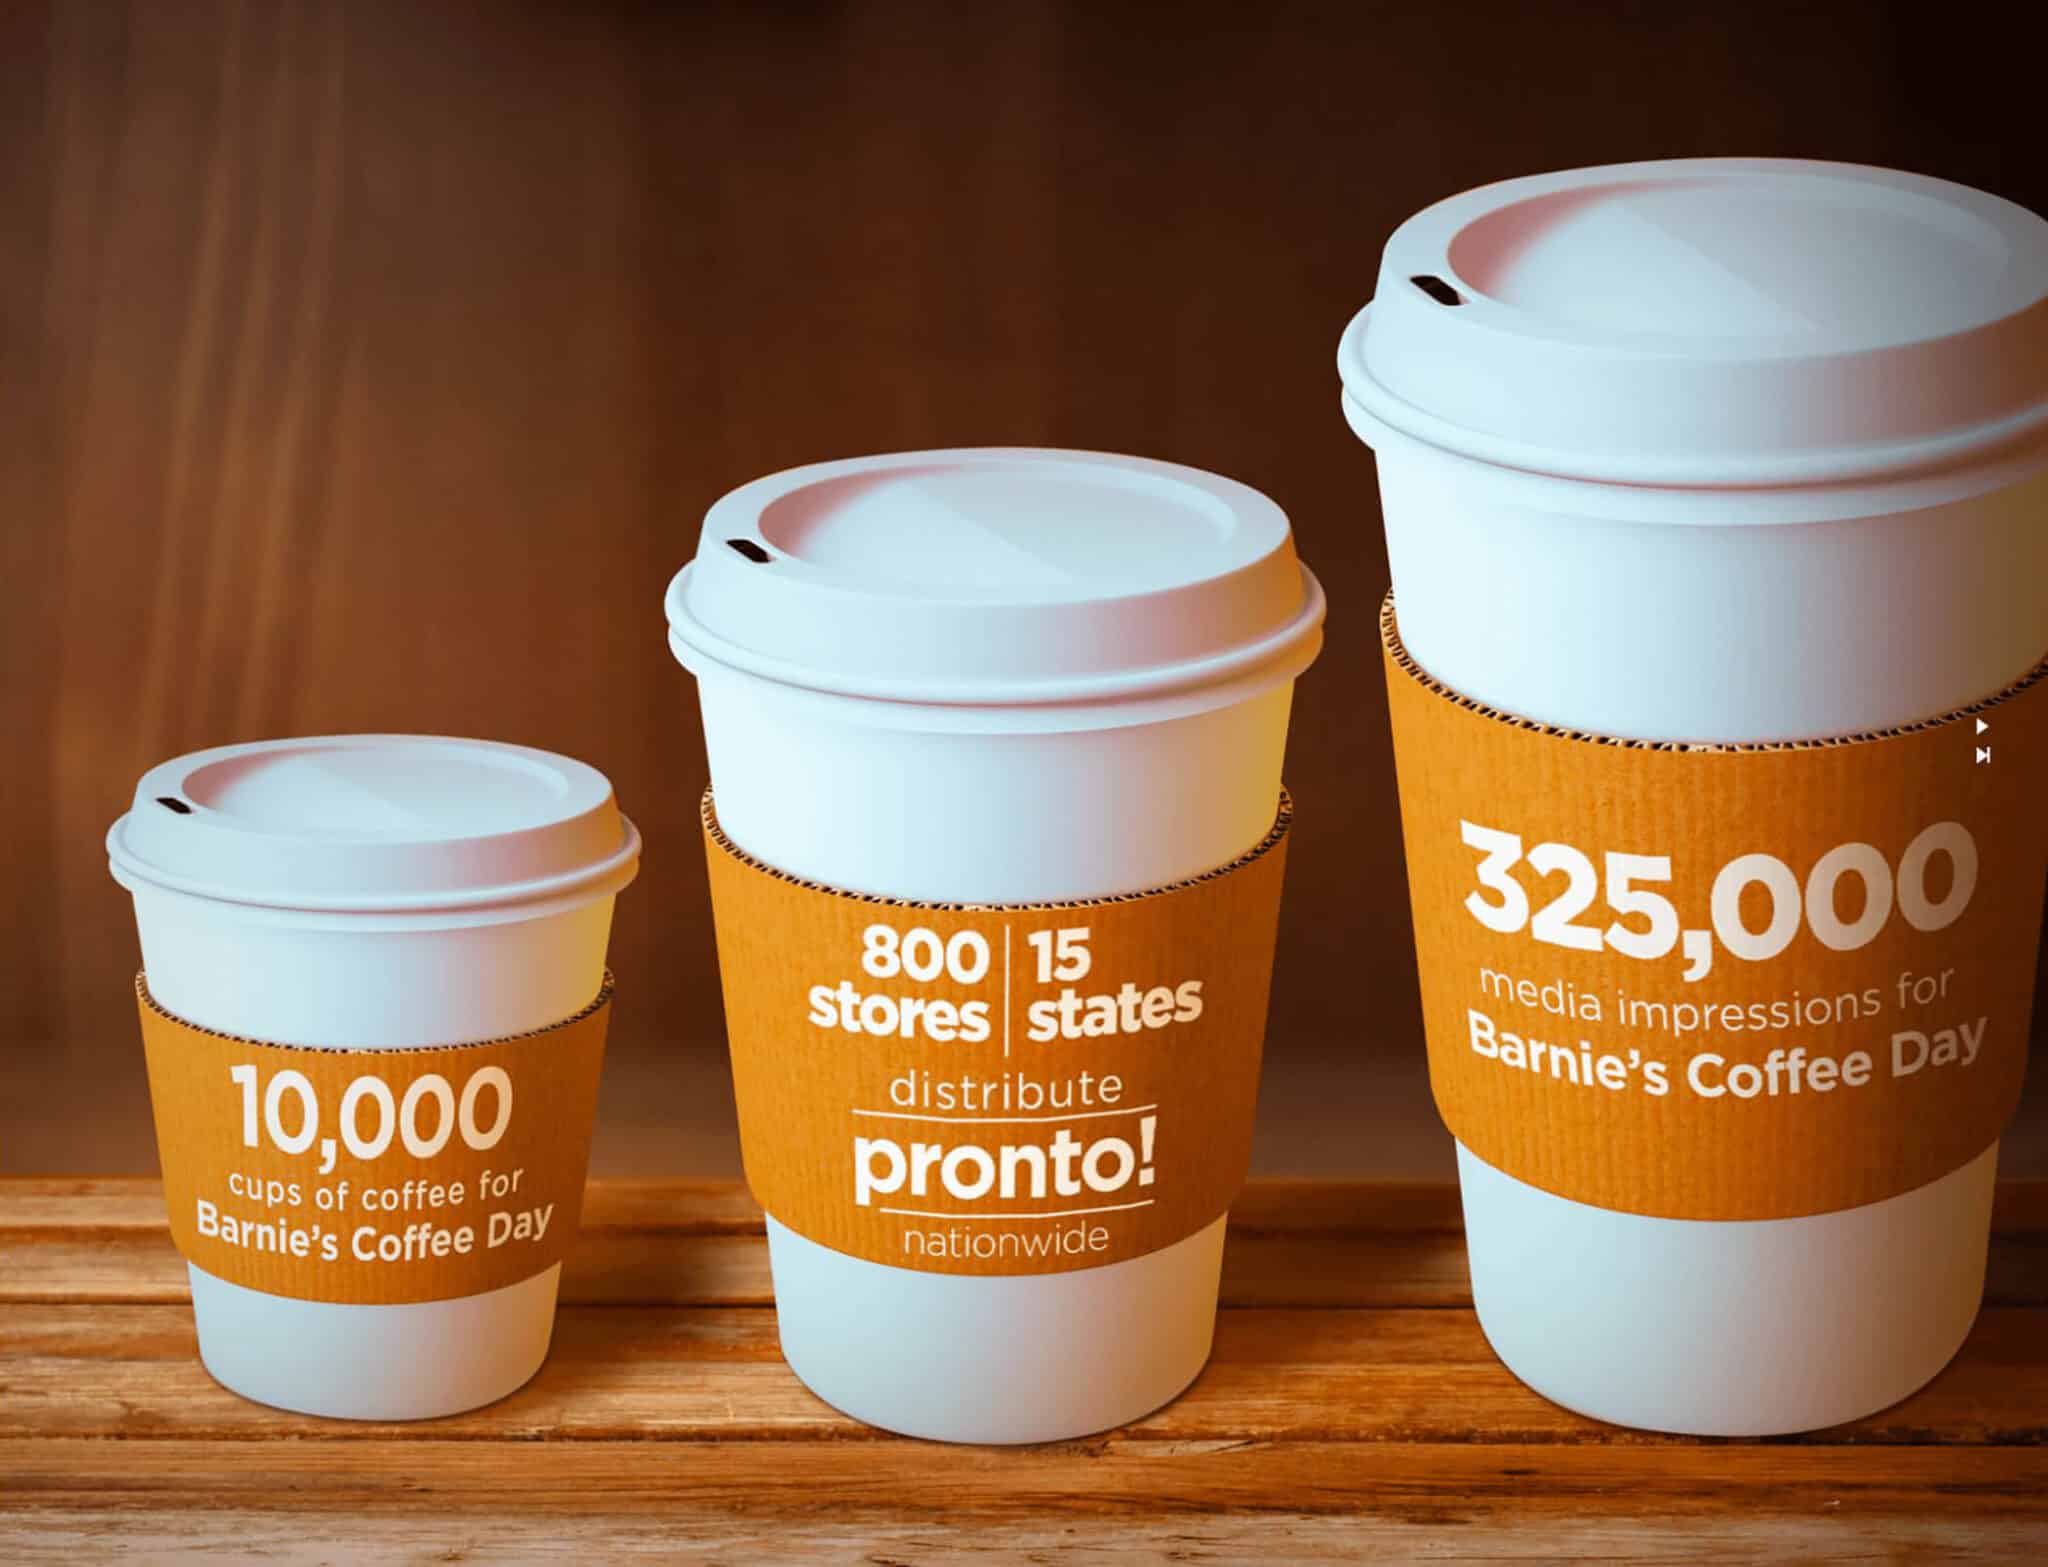 Three branded coffee cups on wooden surface.